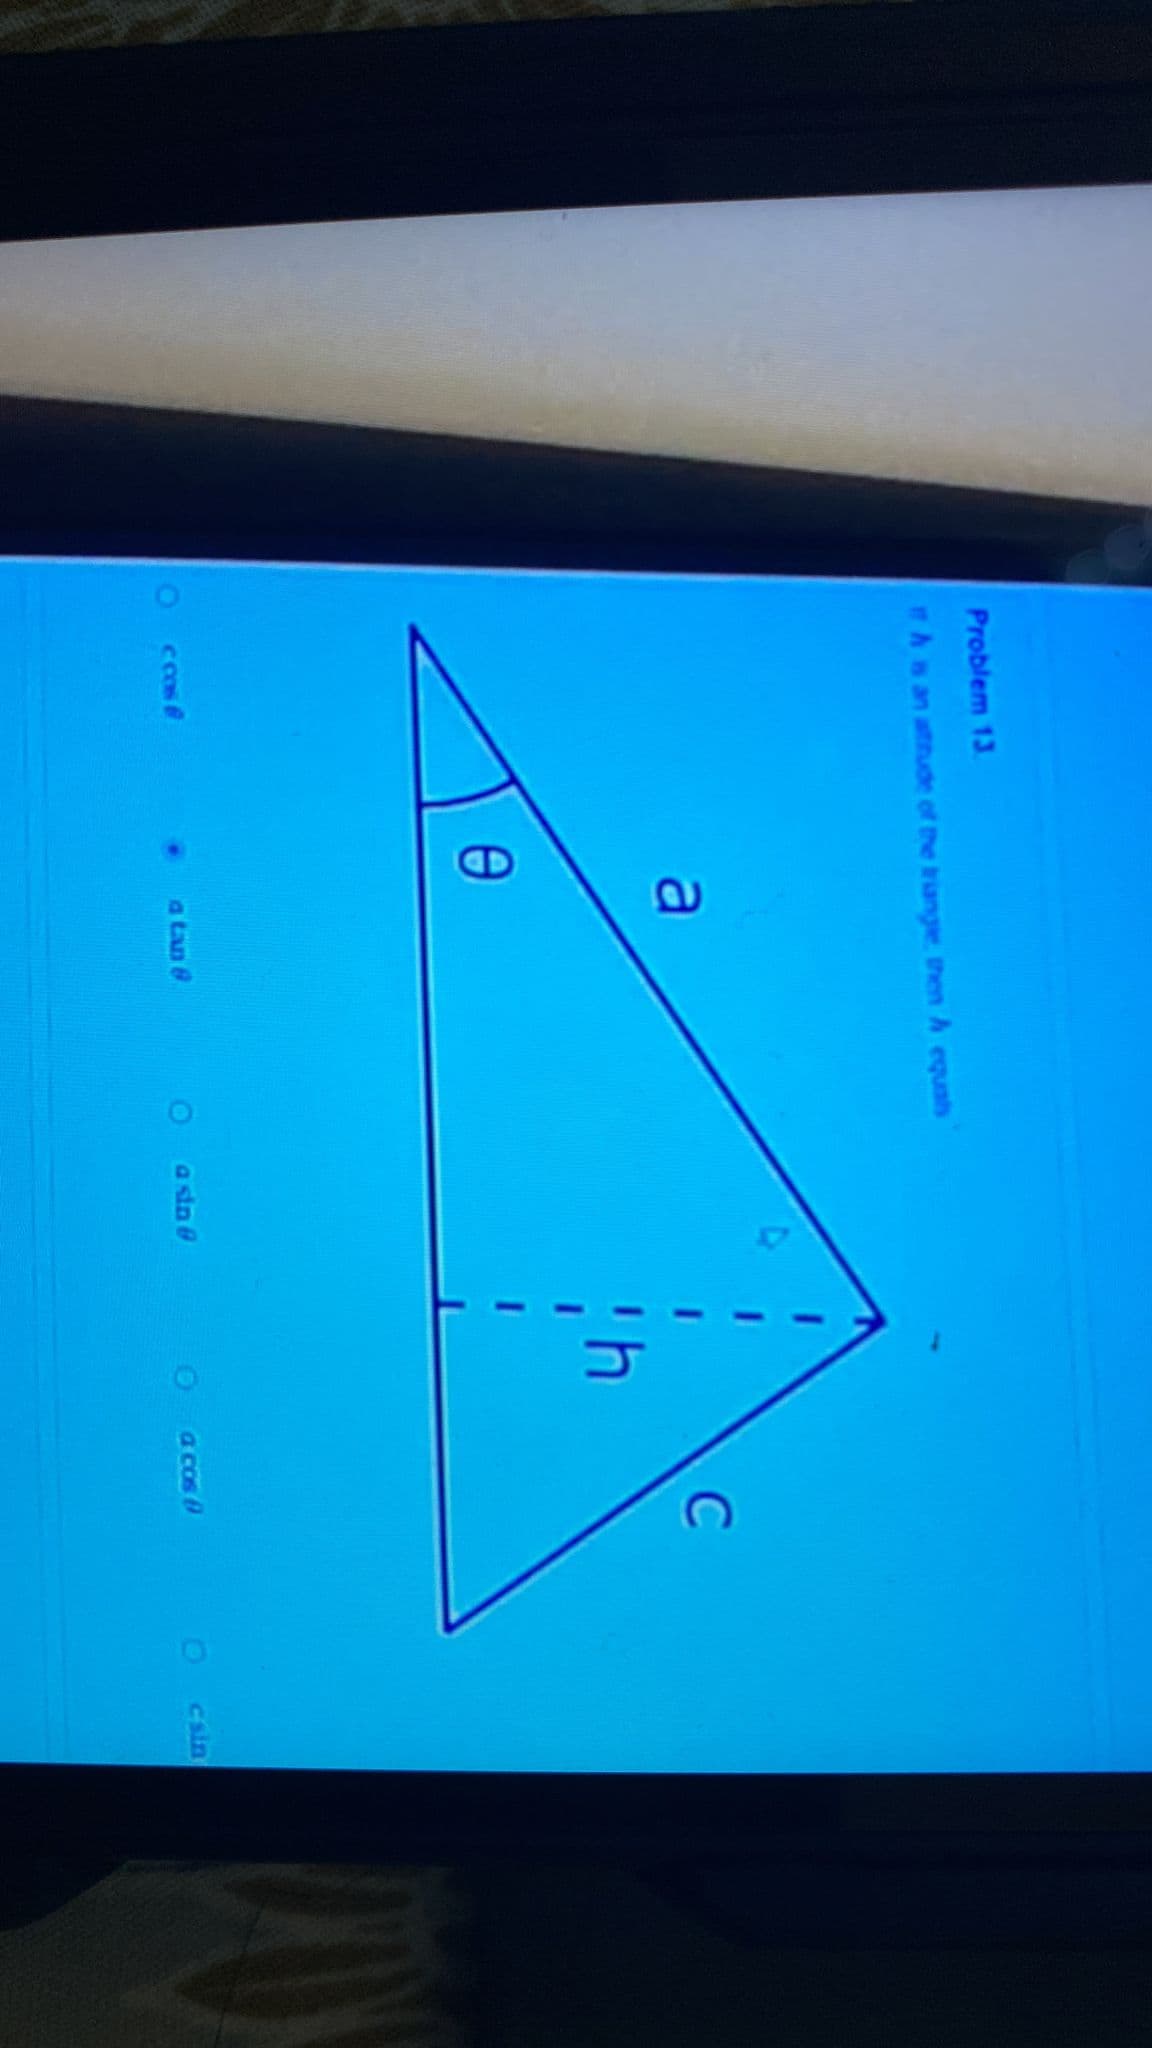 Problem 13.
ITA is an altitude of the triangle, then A equals
ccos
a
Ө
a tan 8
O
a sin @
C
O a cos
O
csin